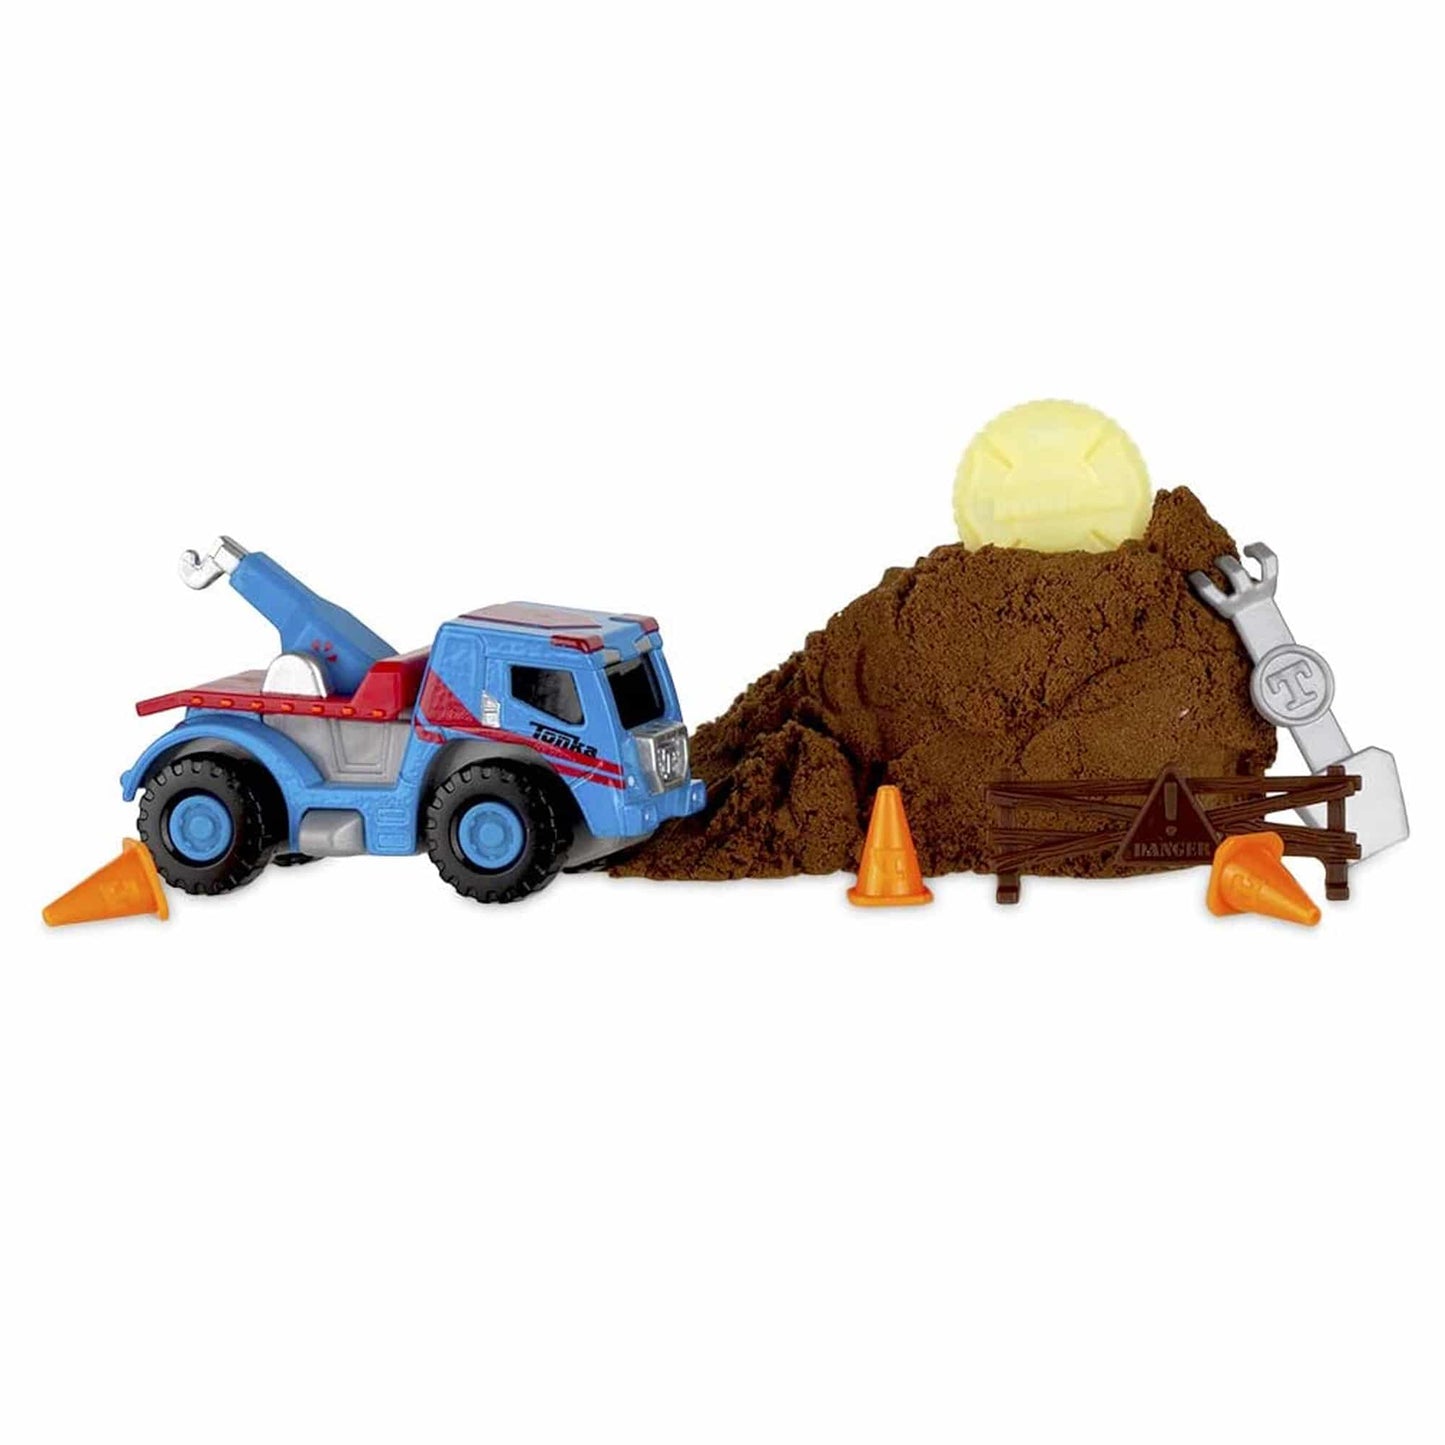 Toy - Mud Rescue Metal Movers